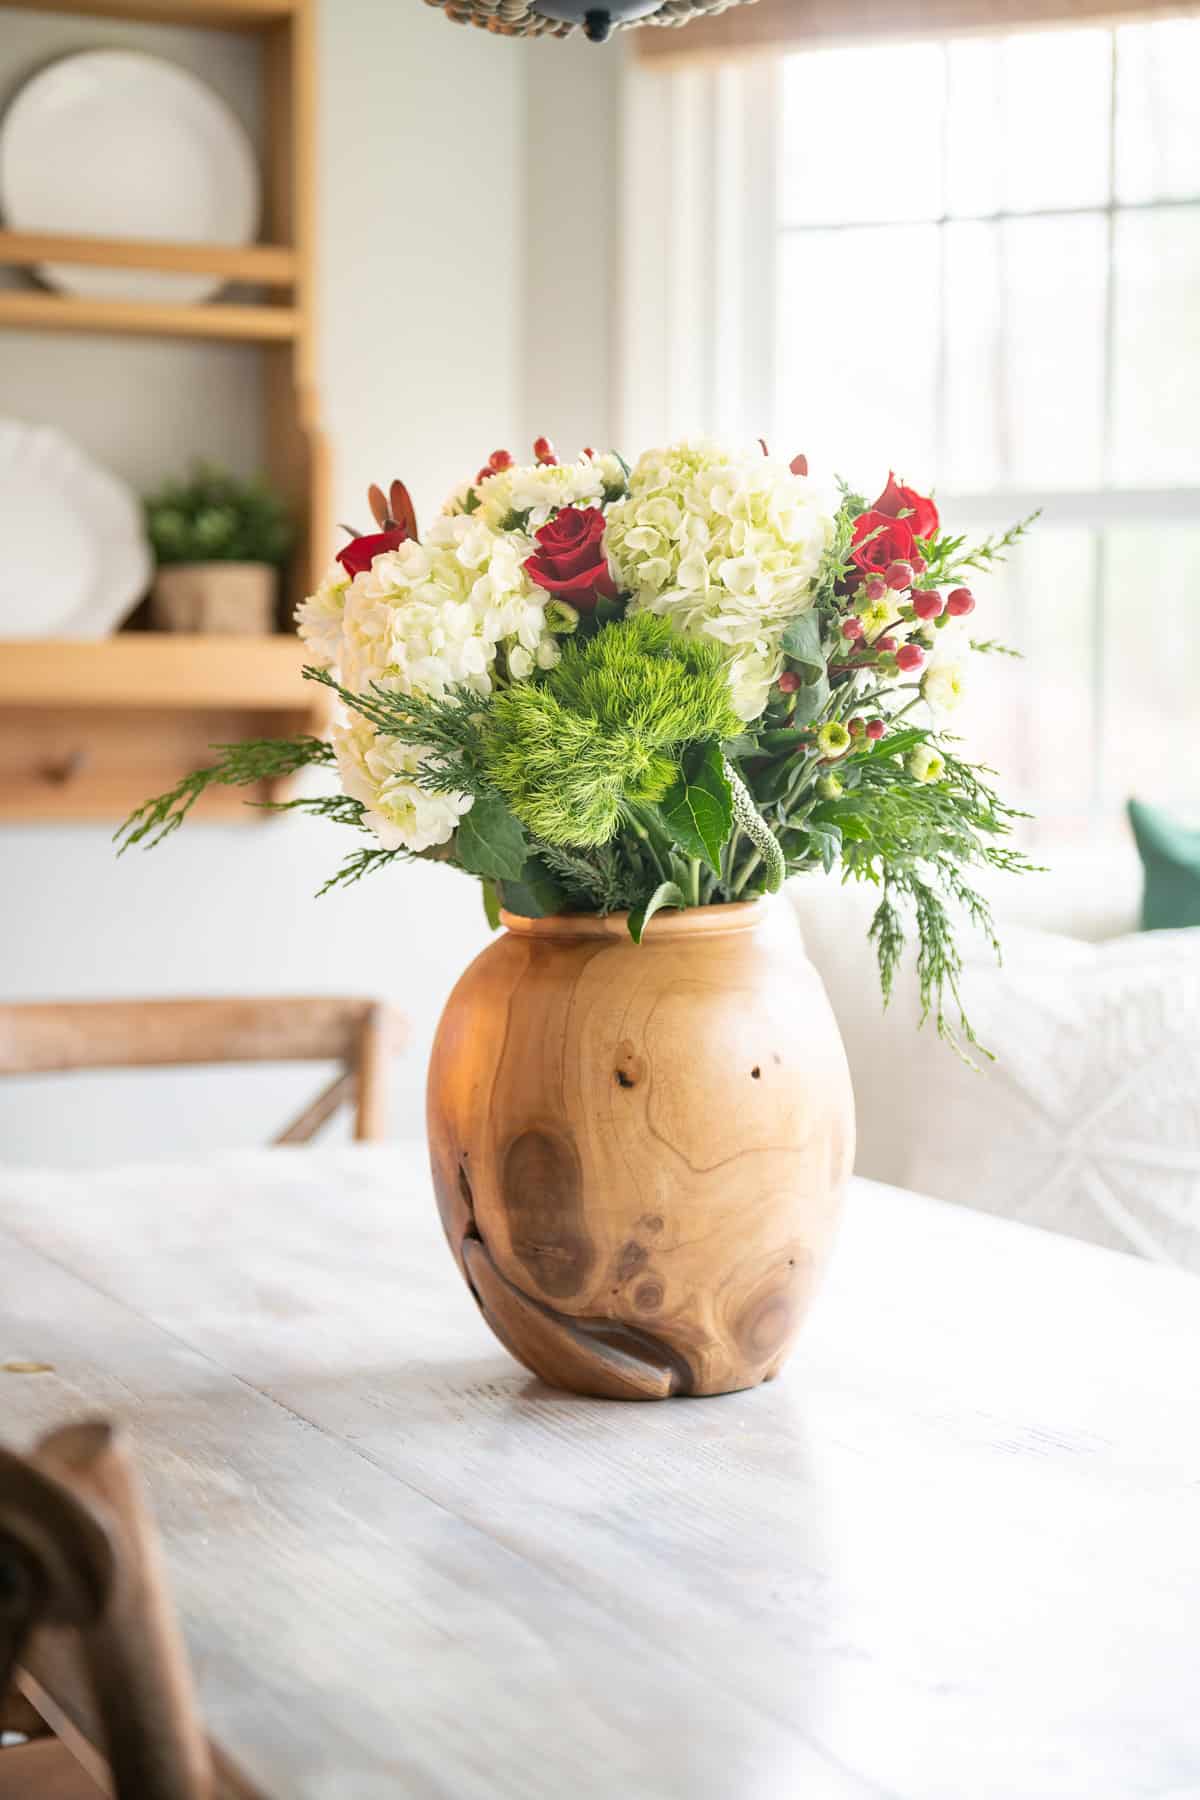 Christmas floral arrangment with red, white and green flowers in a wooden vase